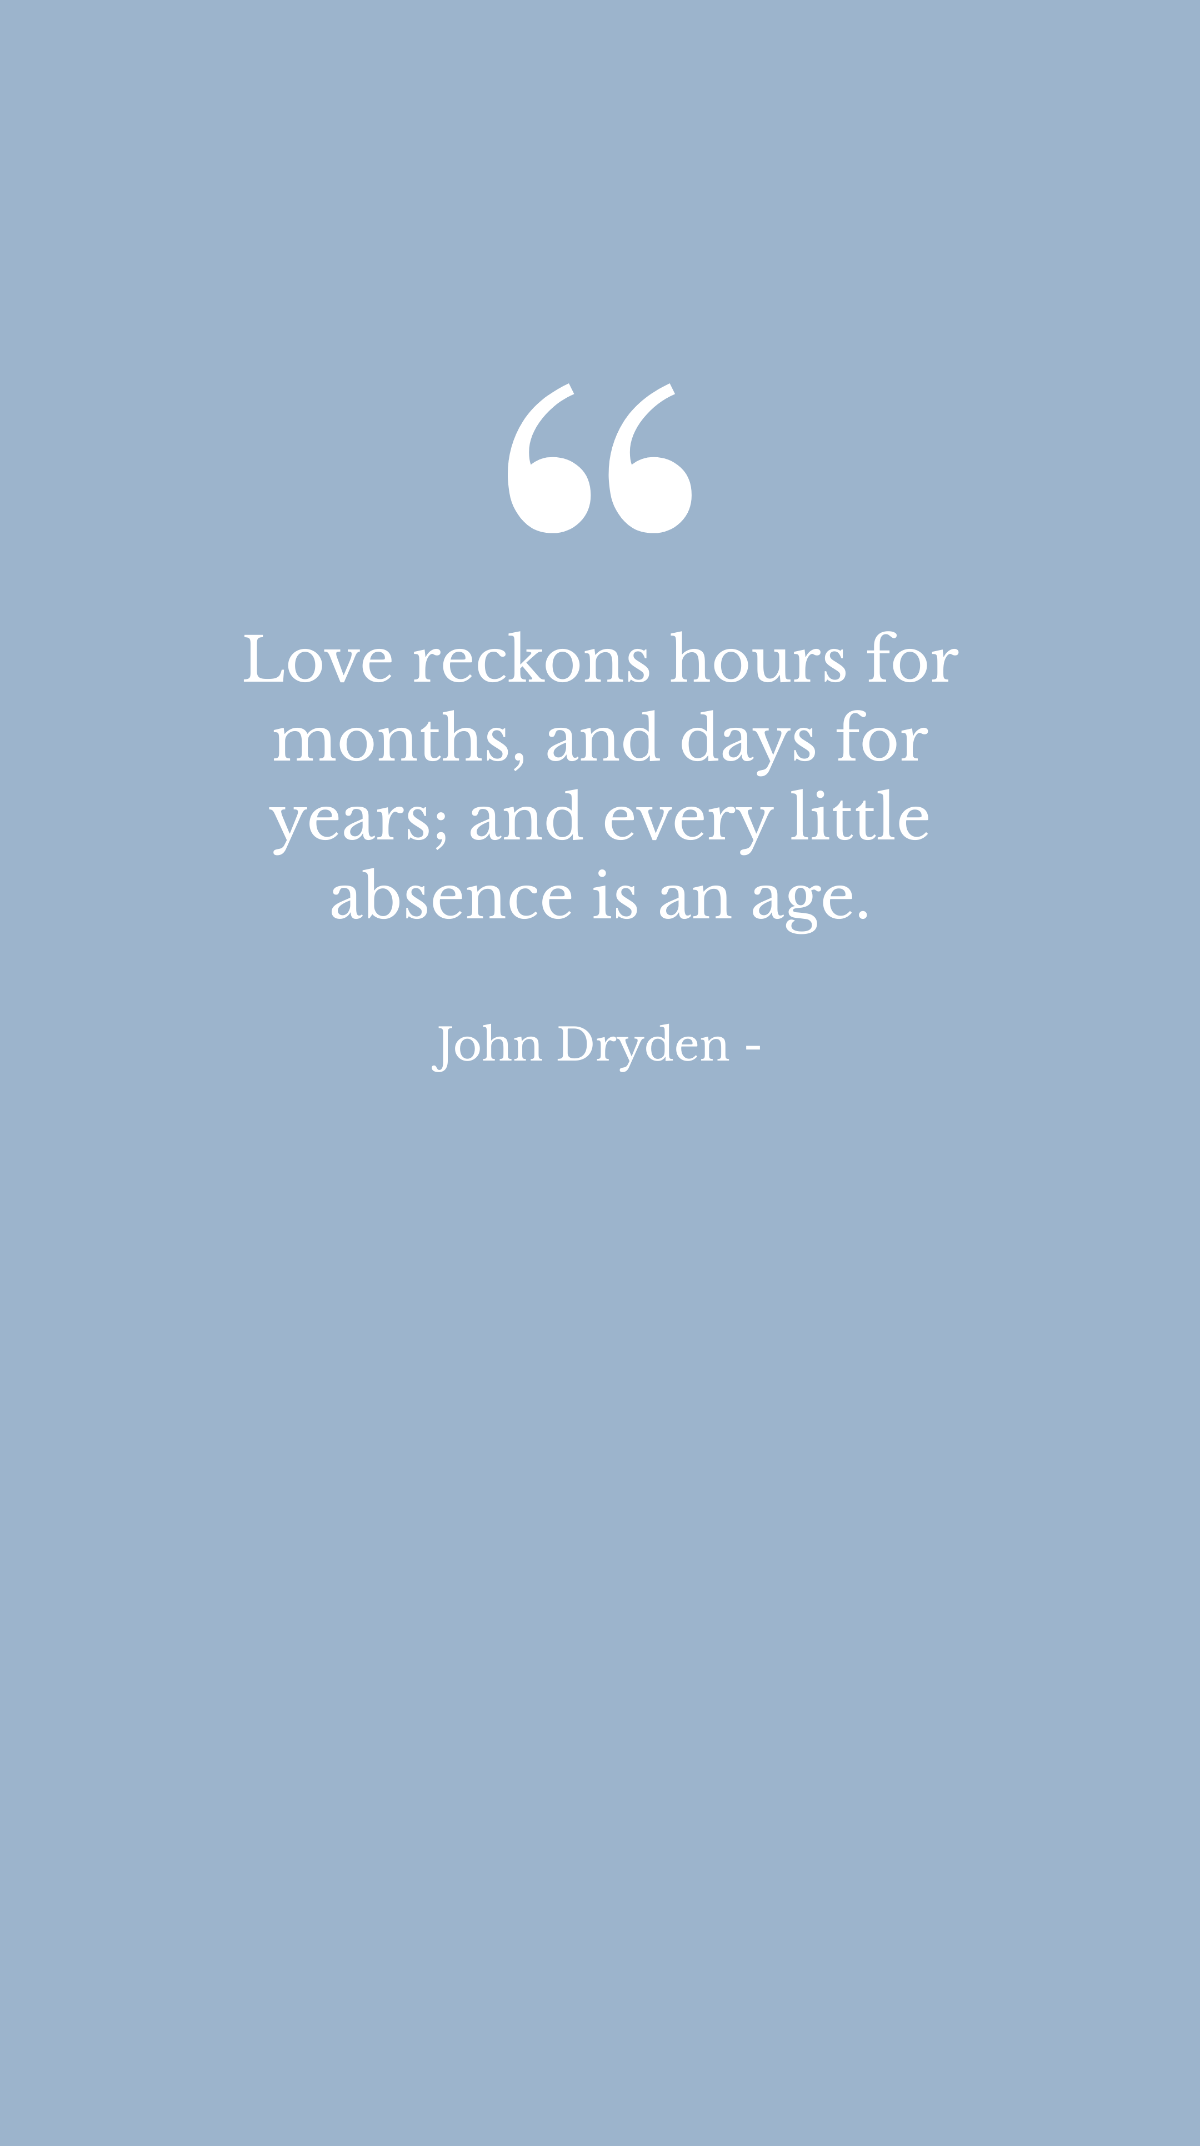 John Dryden - Love reckons hours for months, and days for years; and every little absence is an age. Template